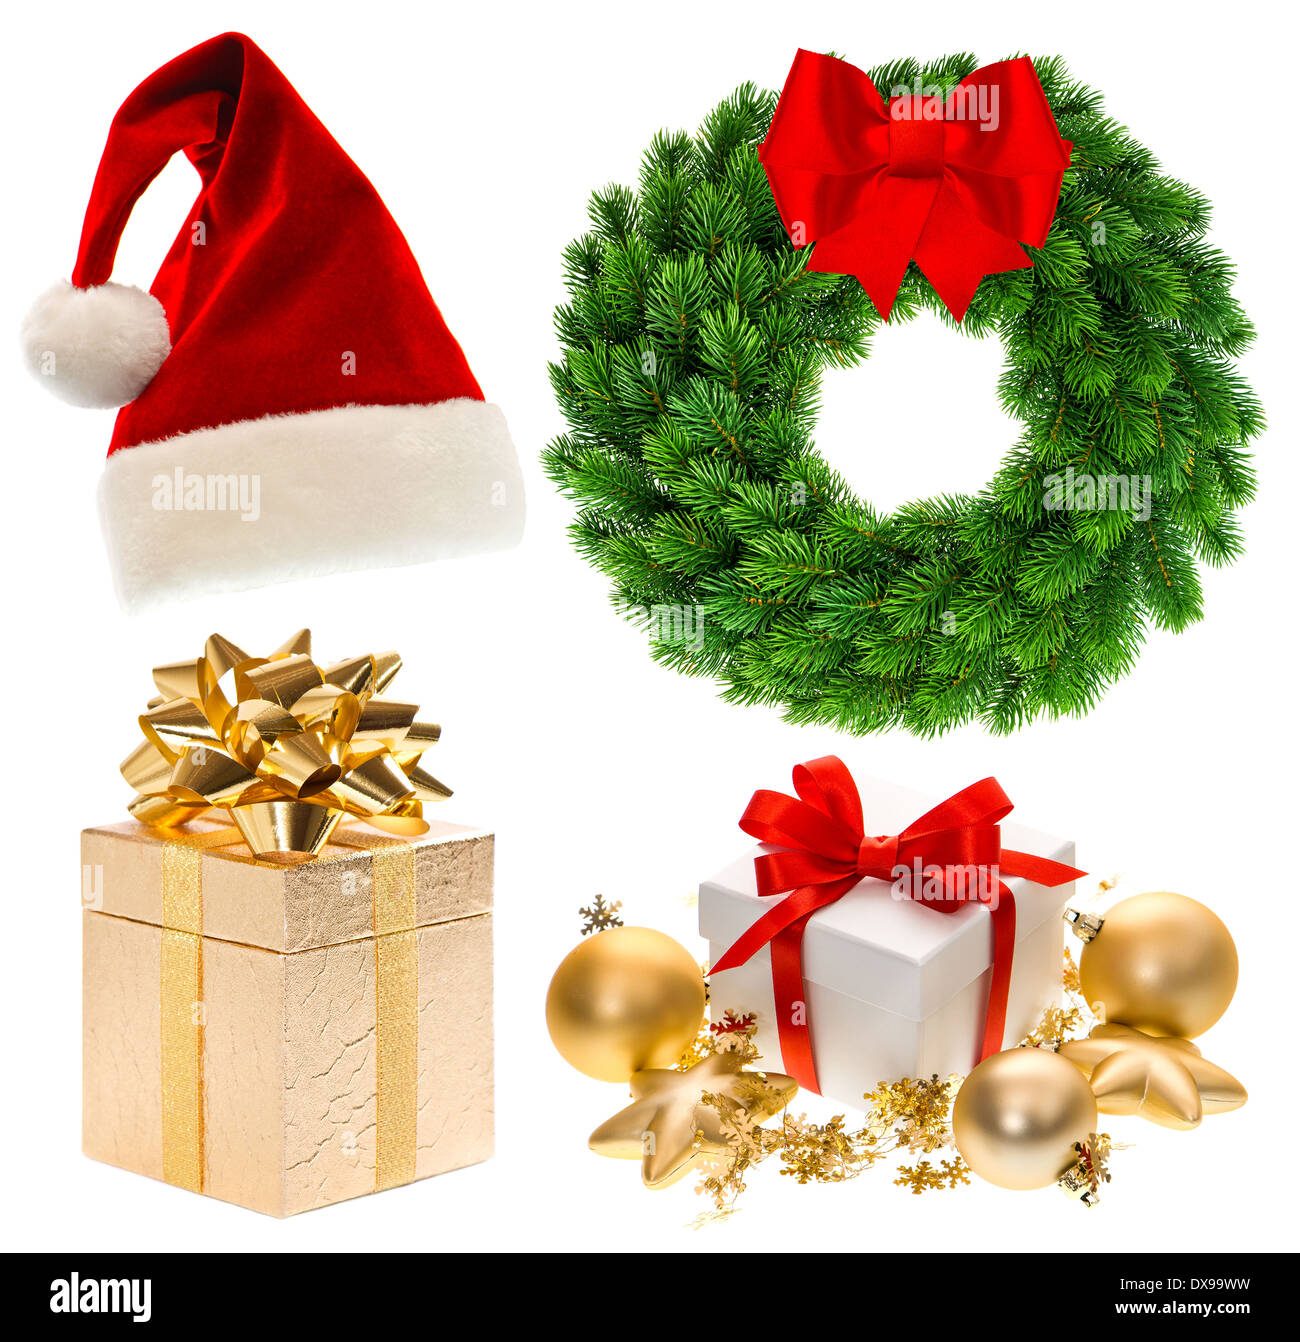 Christmas collection isolated on white background. Santa hat, gifts, baubles, wreath Stock Photo